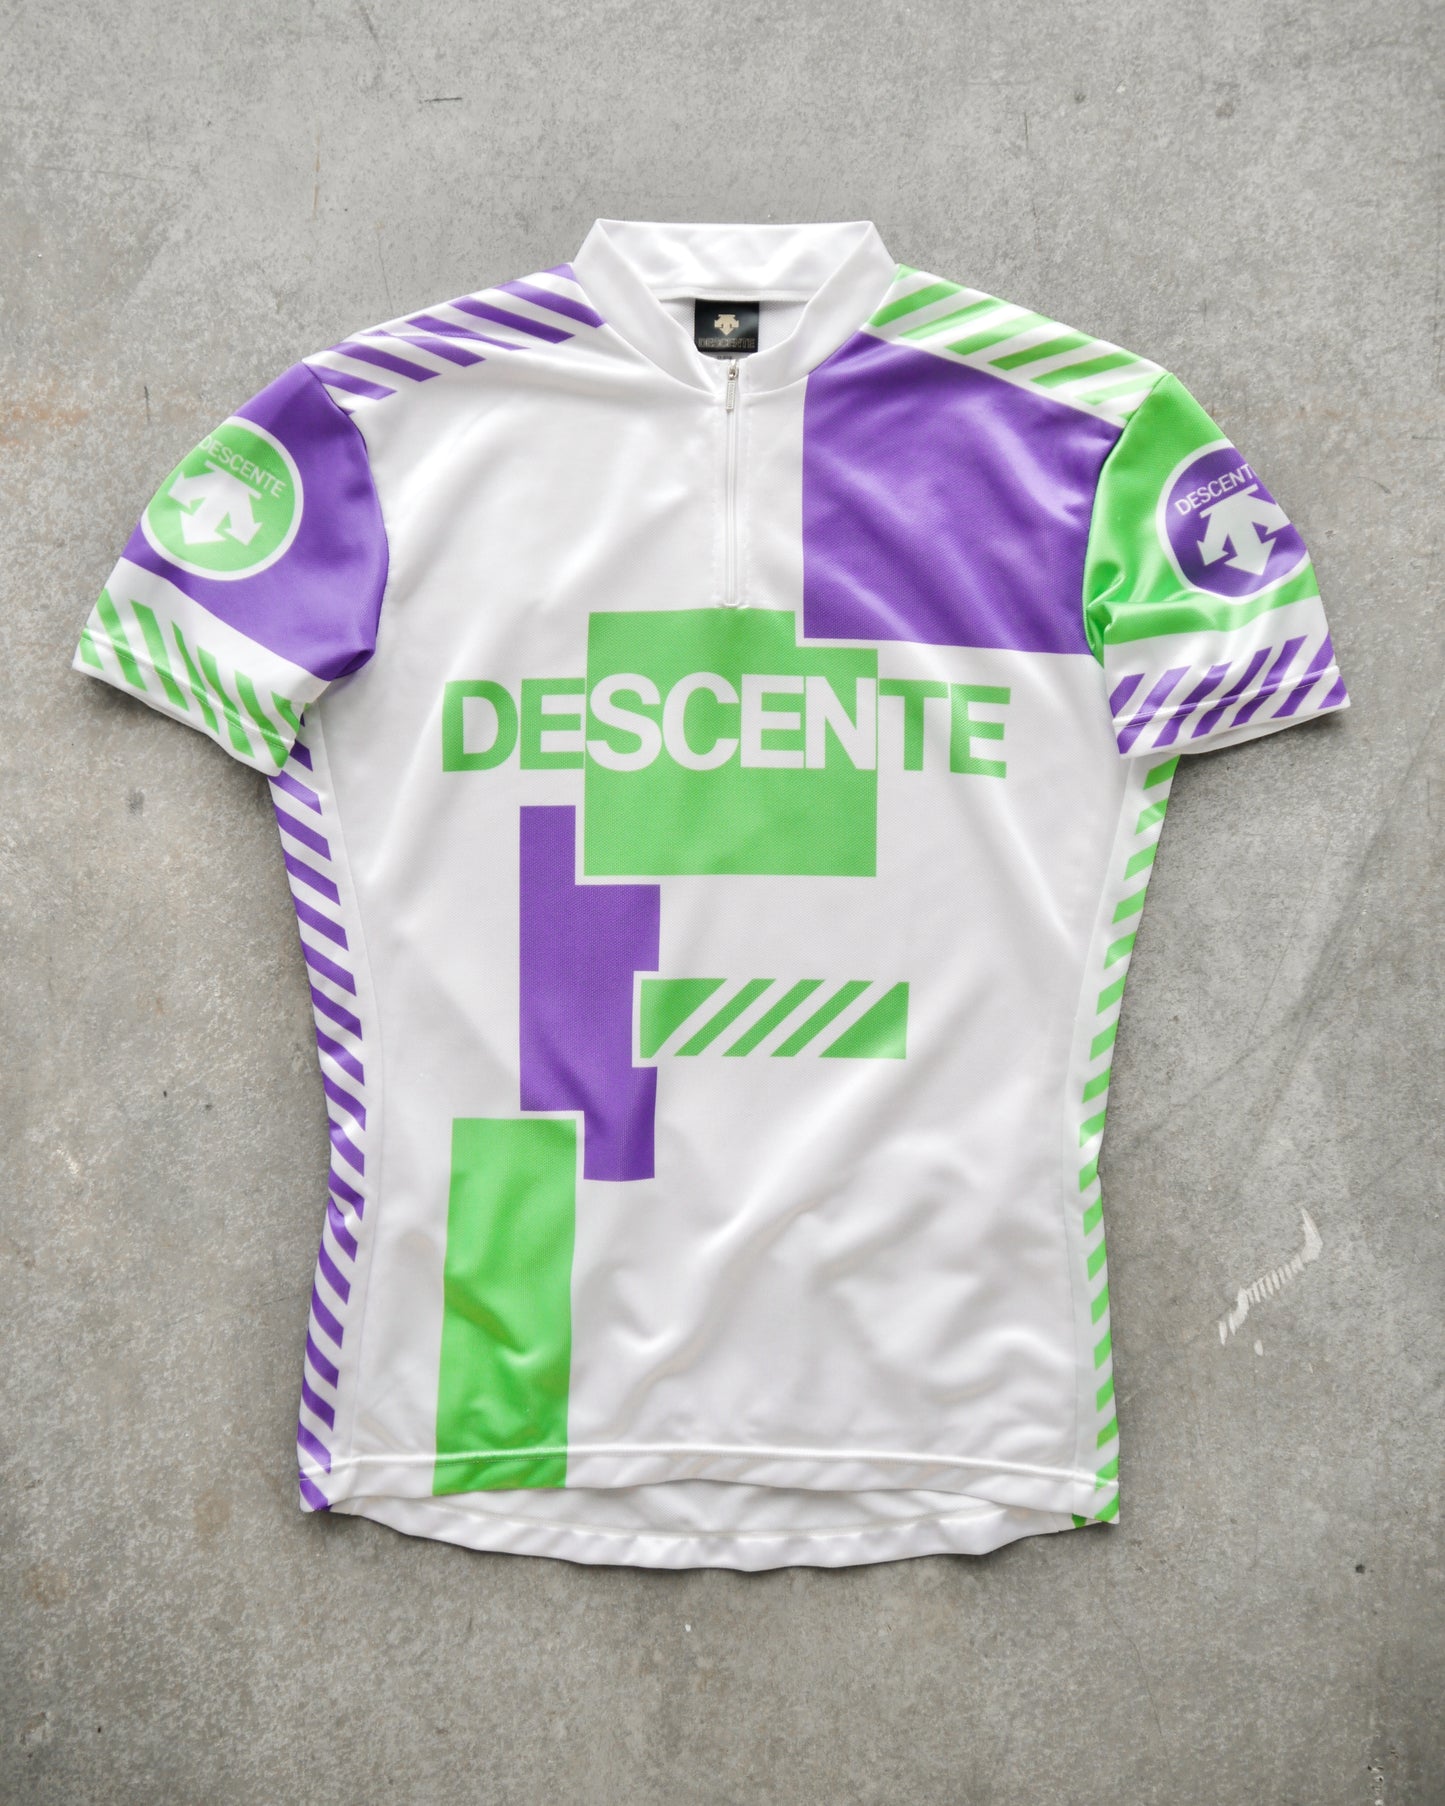 2000s Descente Japanese Cycling Jersey (M)